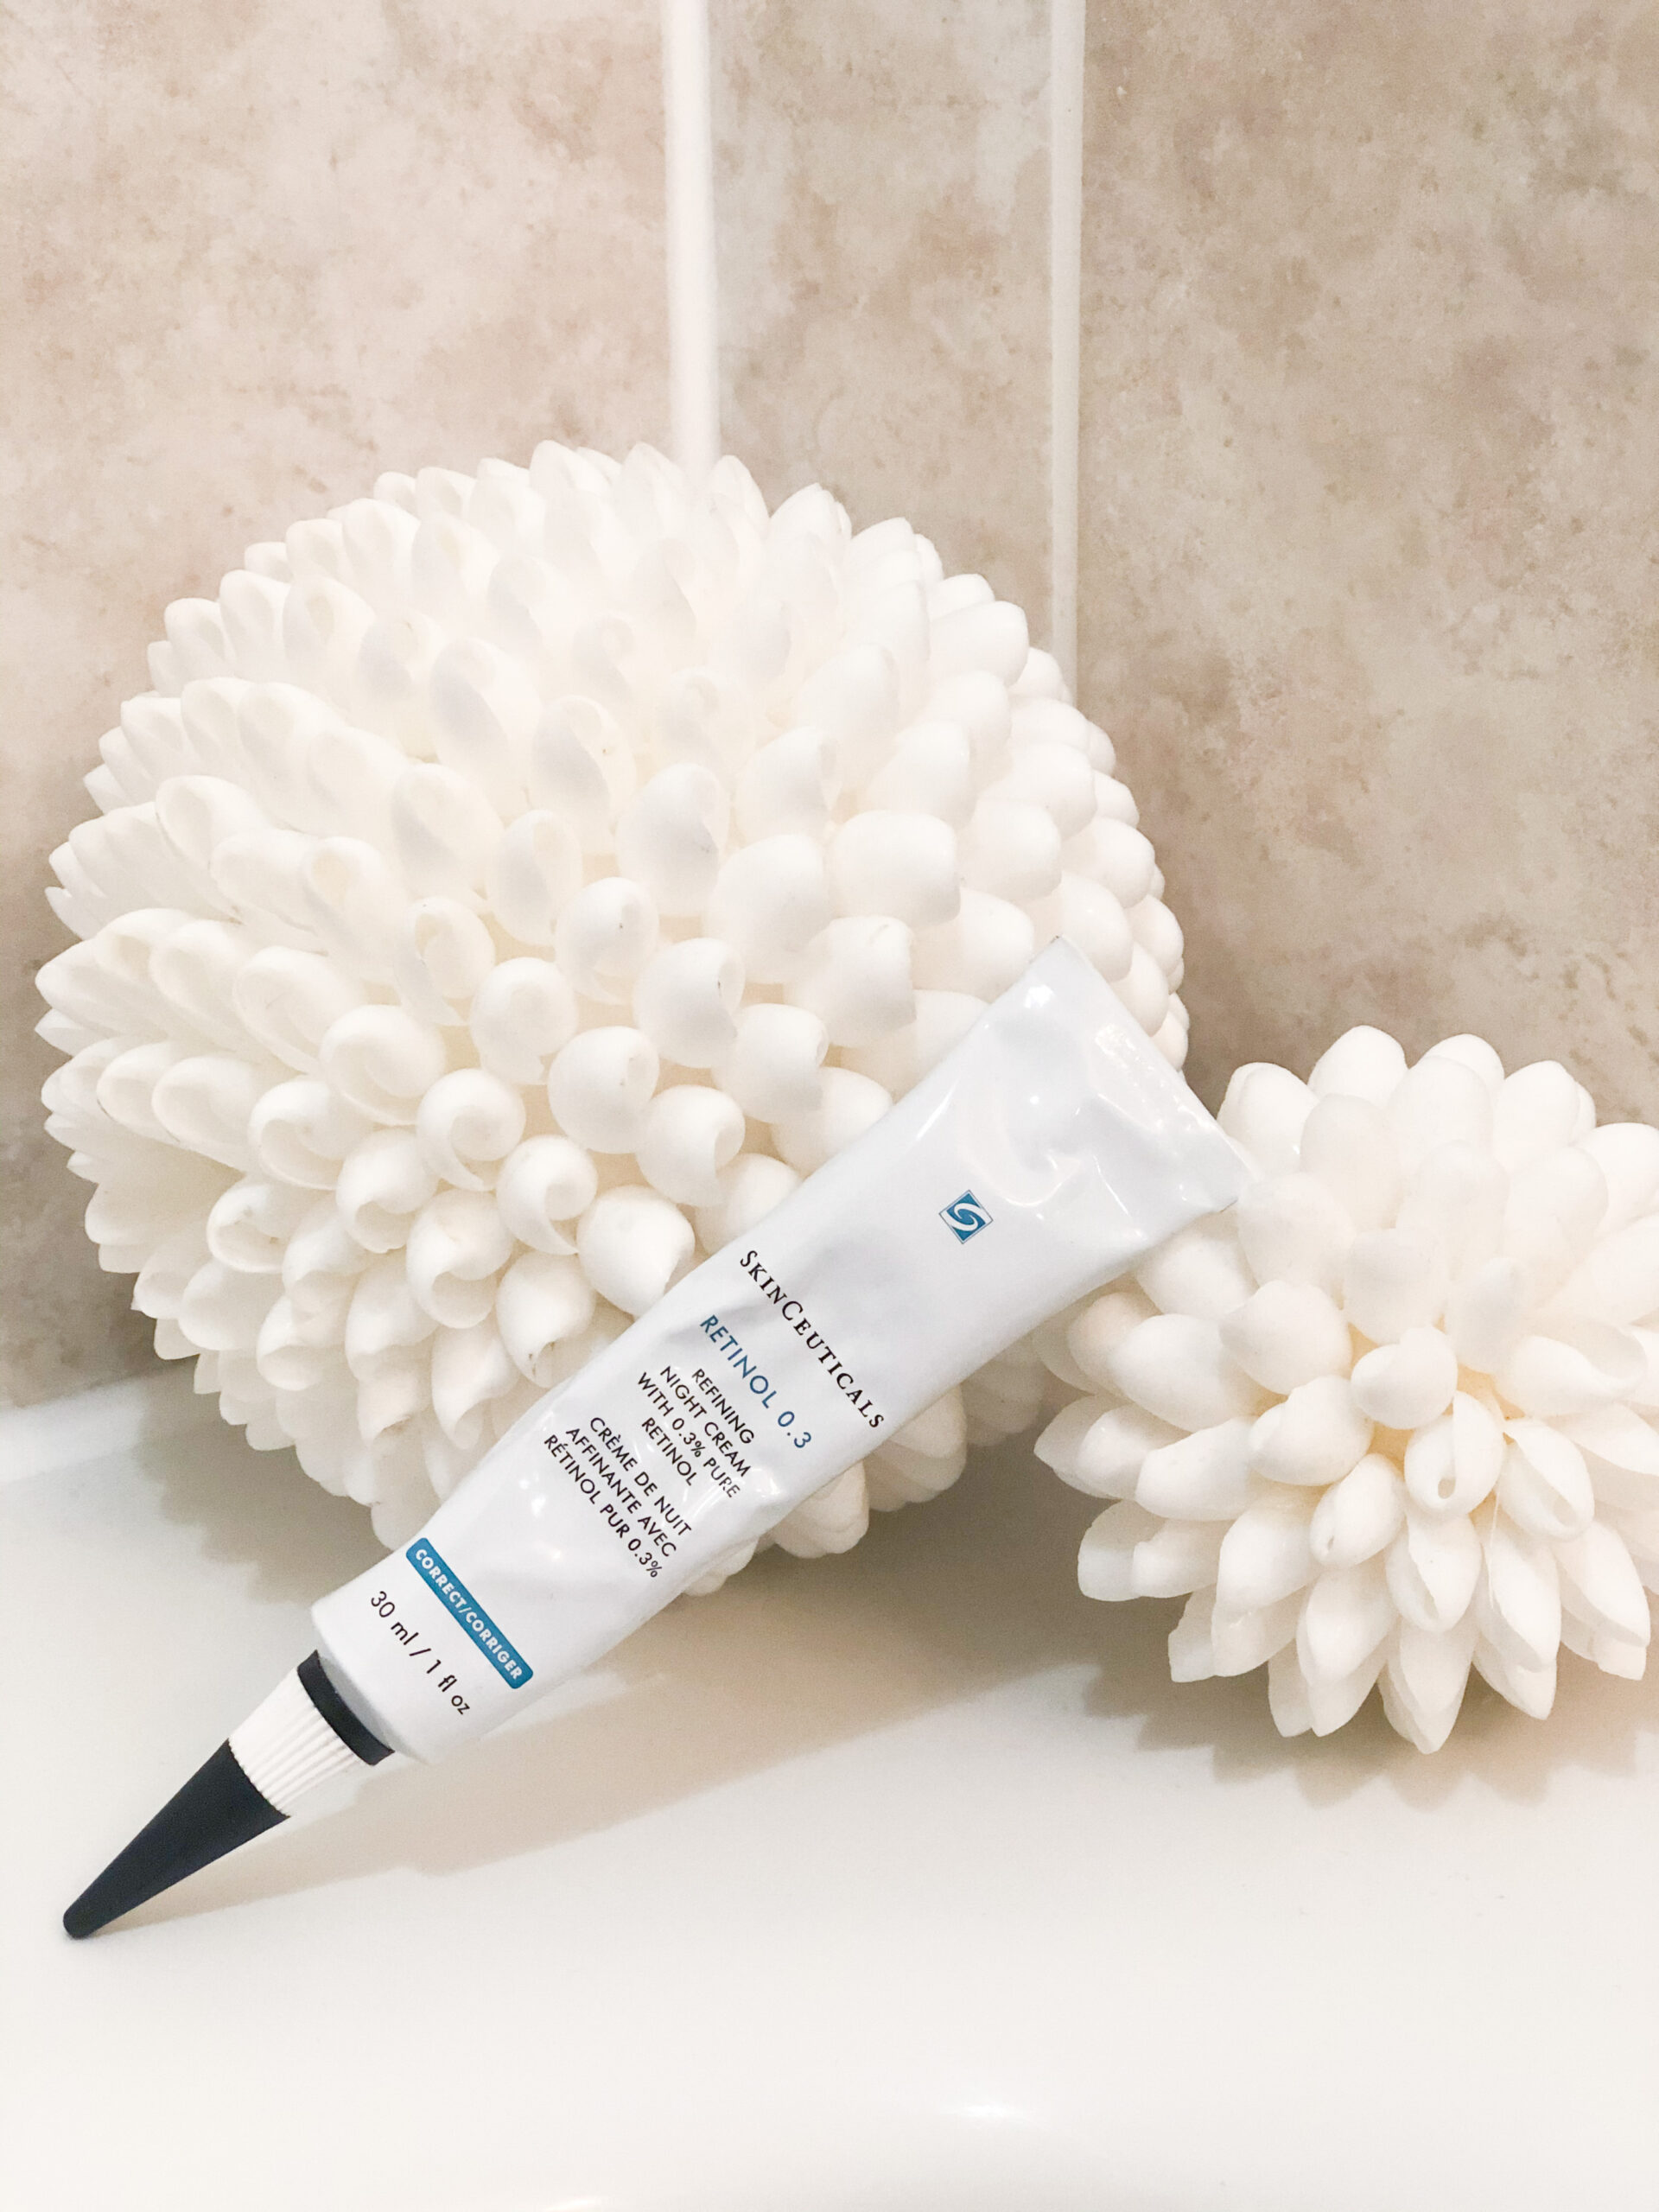 7 must have SkinCeuticals products on Livin' Life with Style 